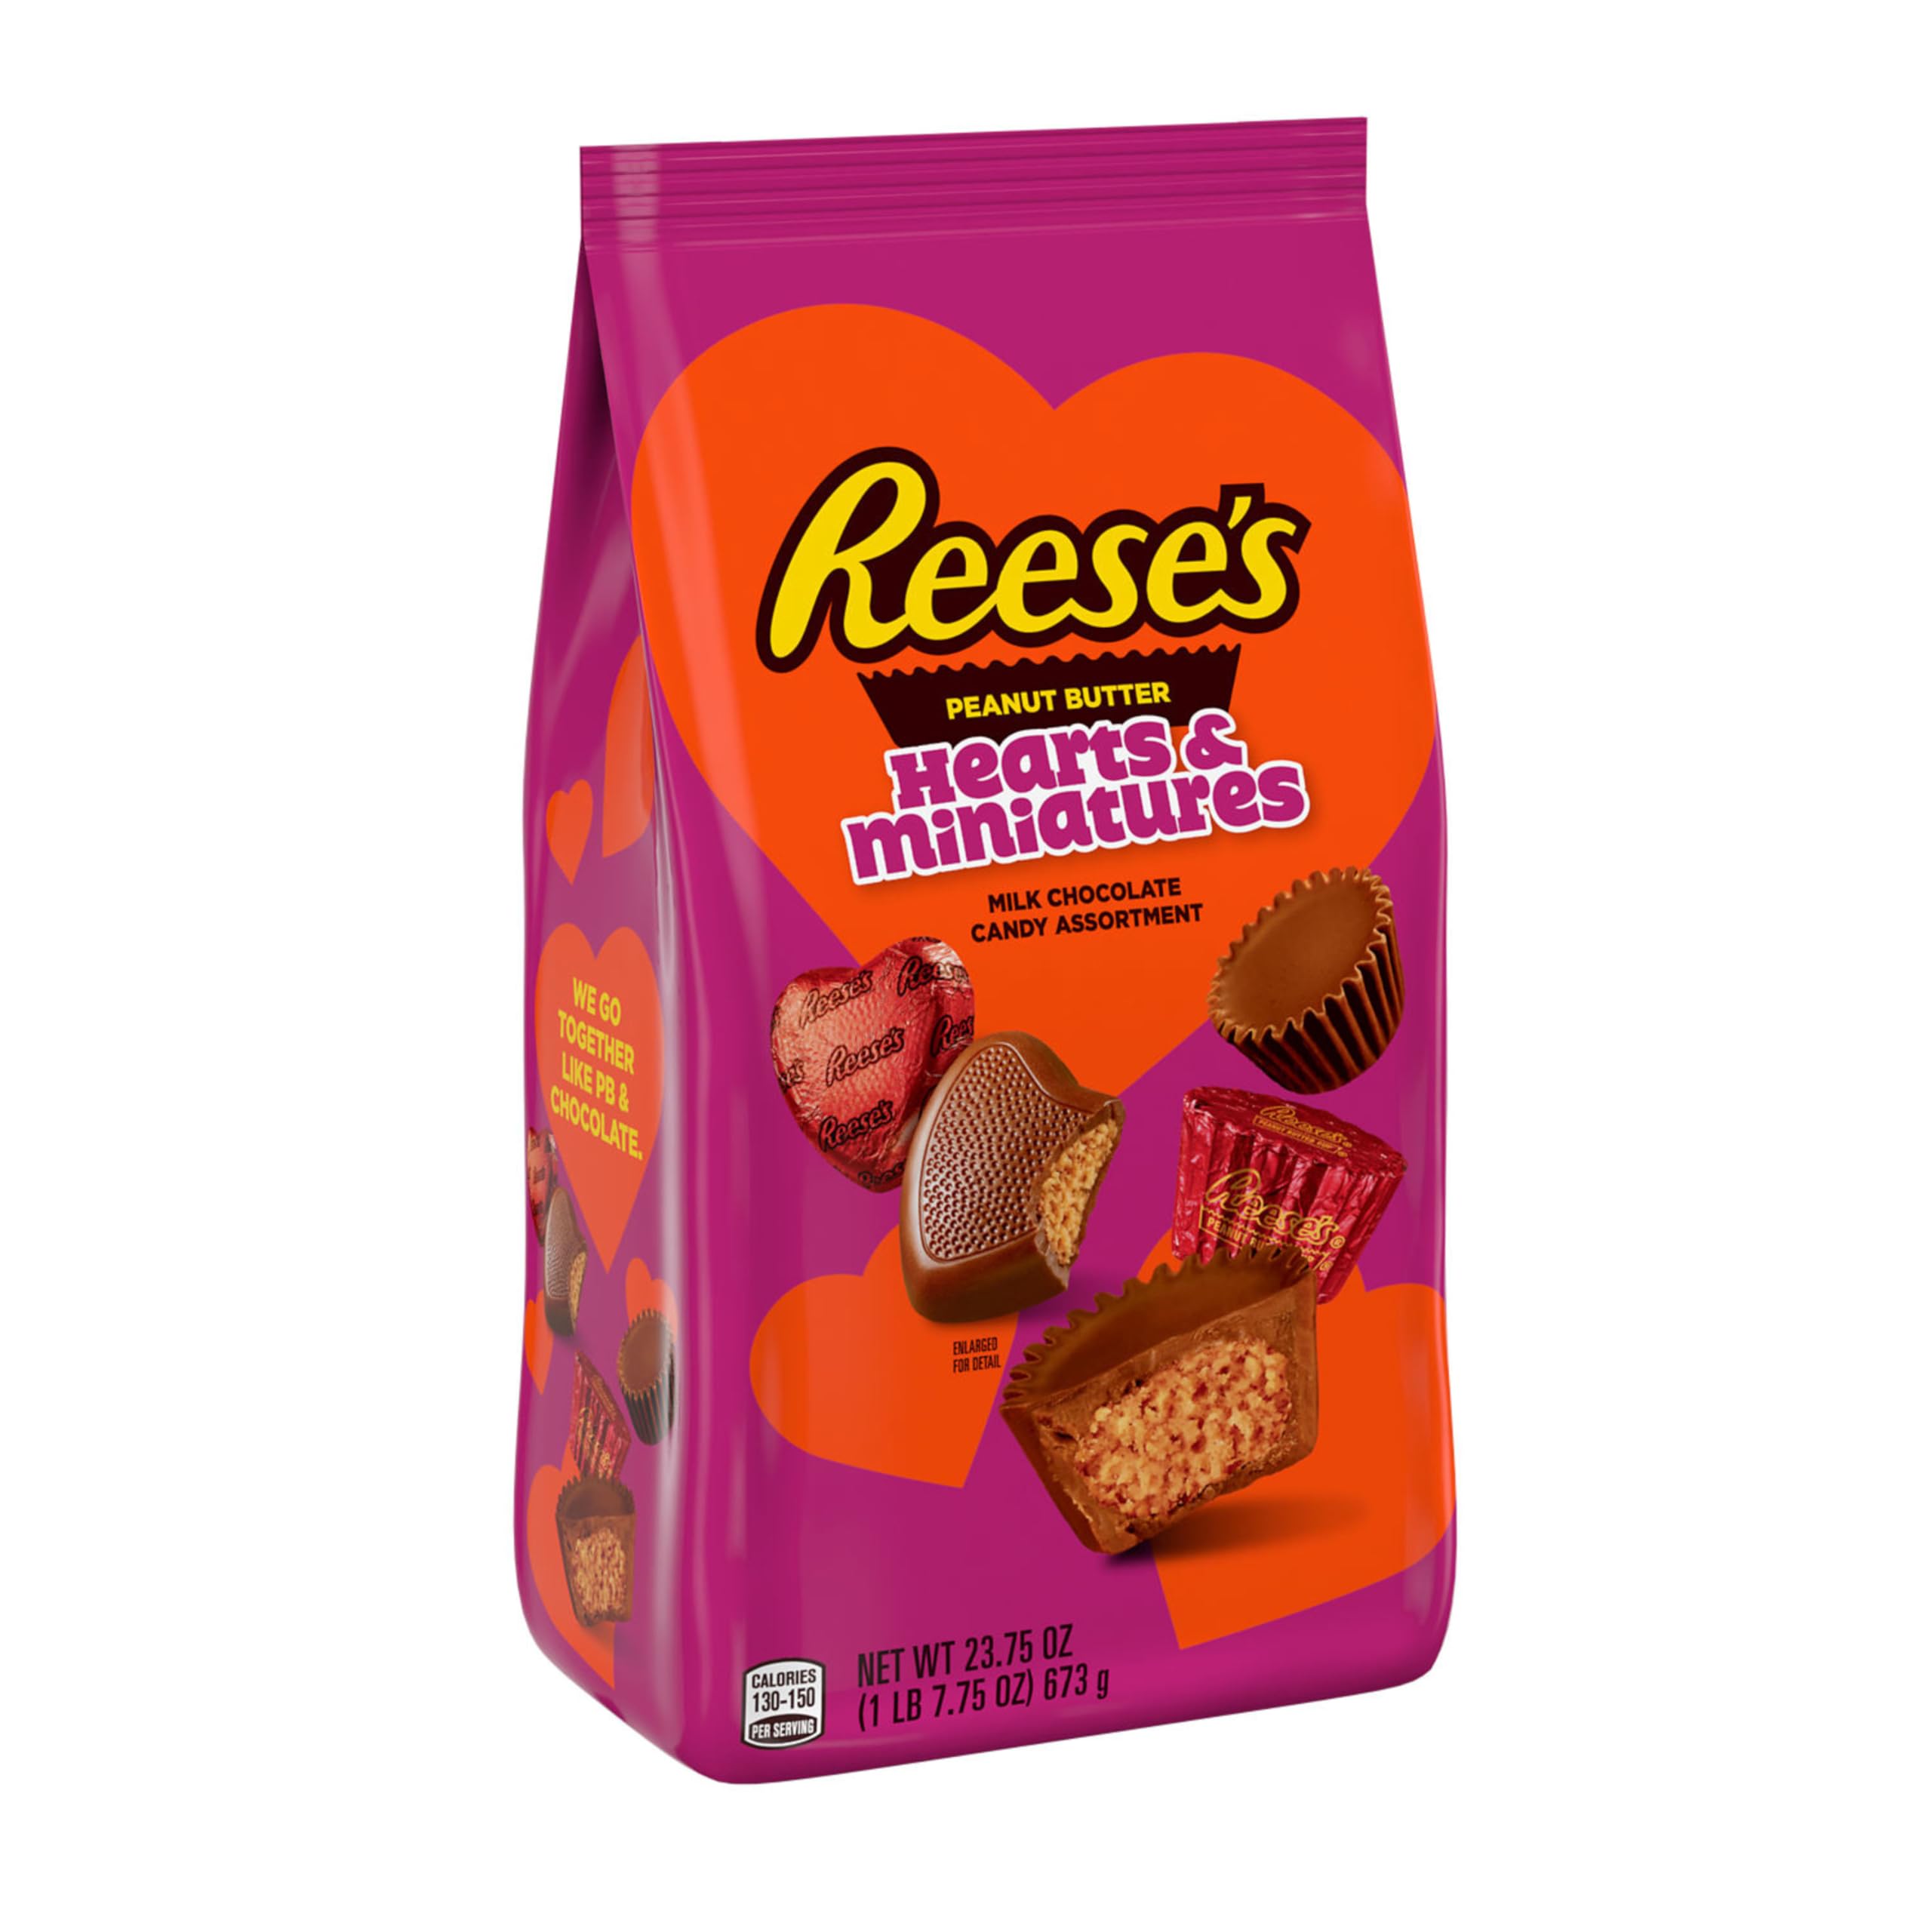 Reese's Miniatures and Hearts